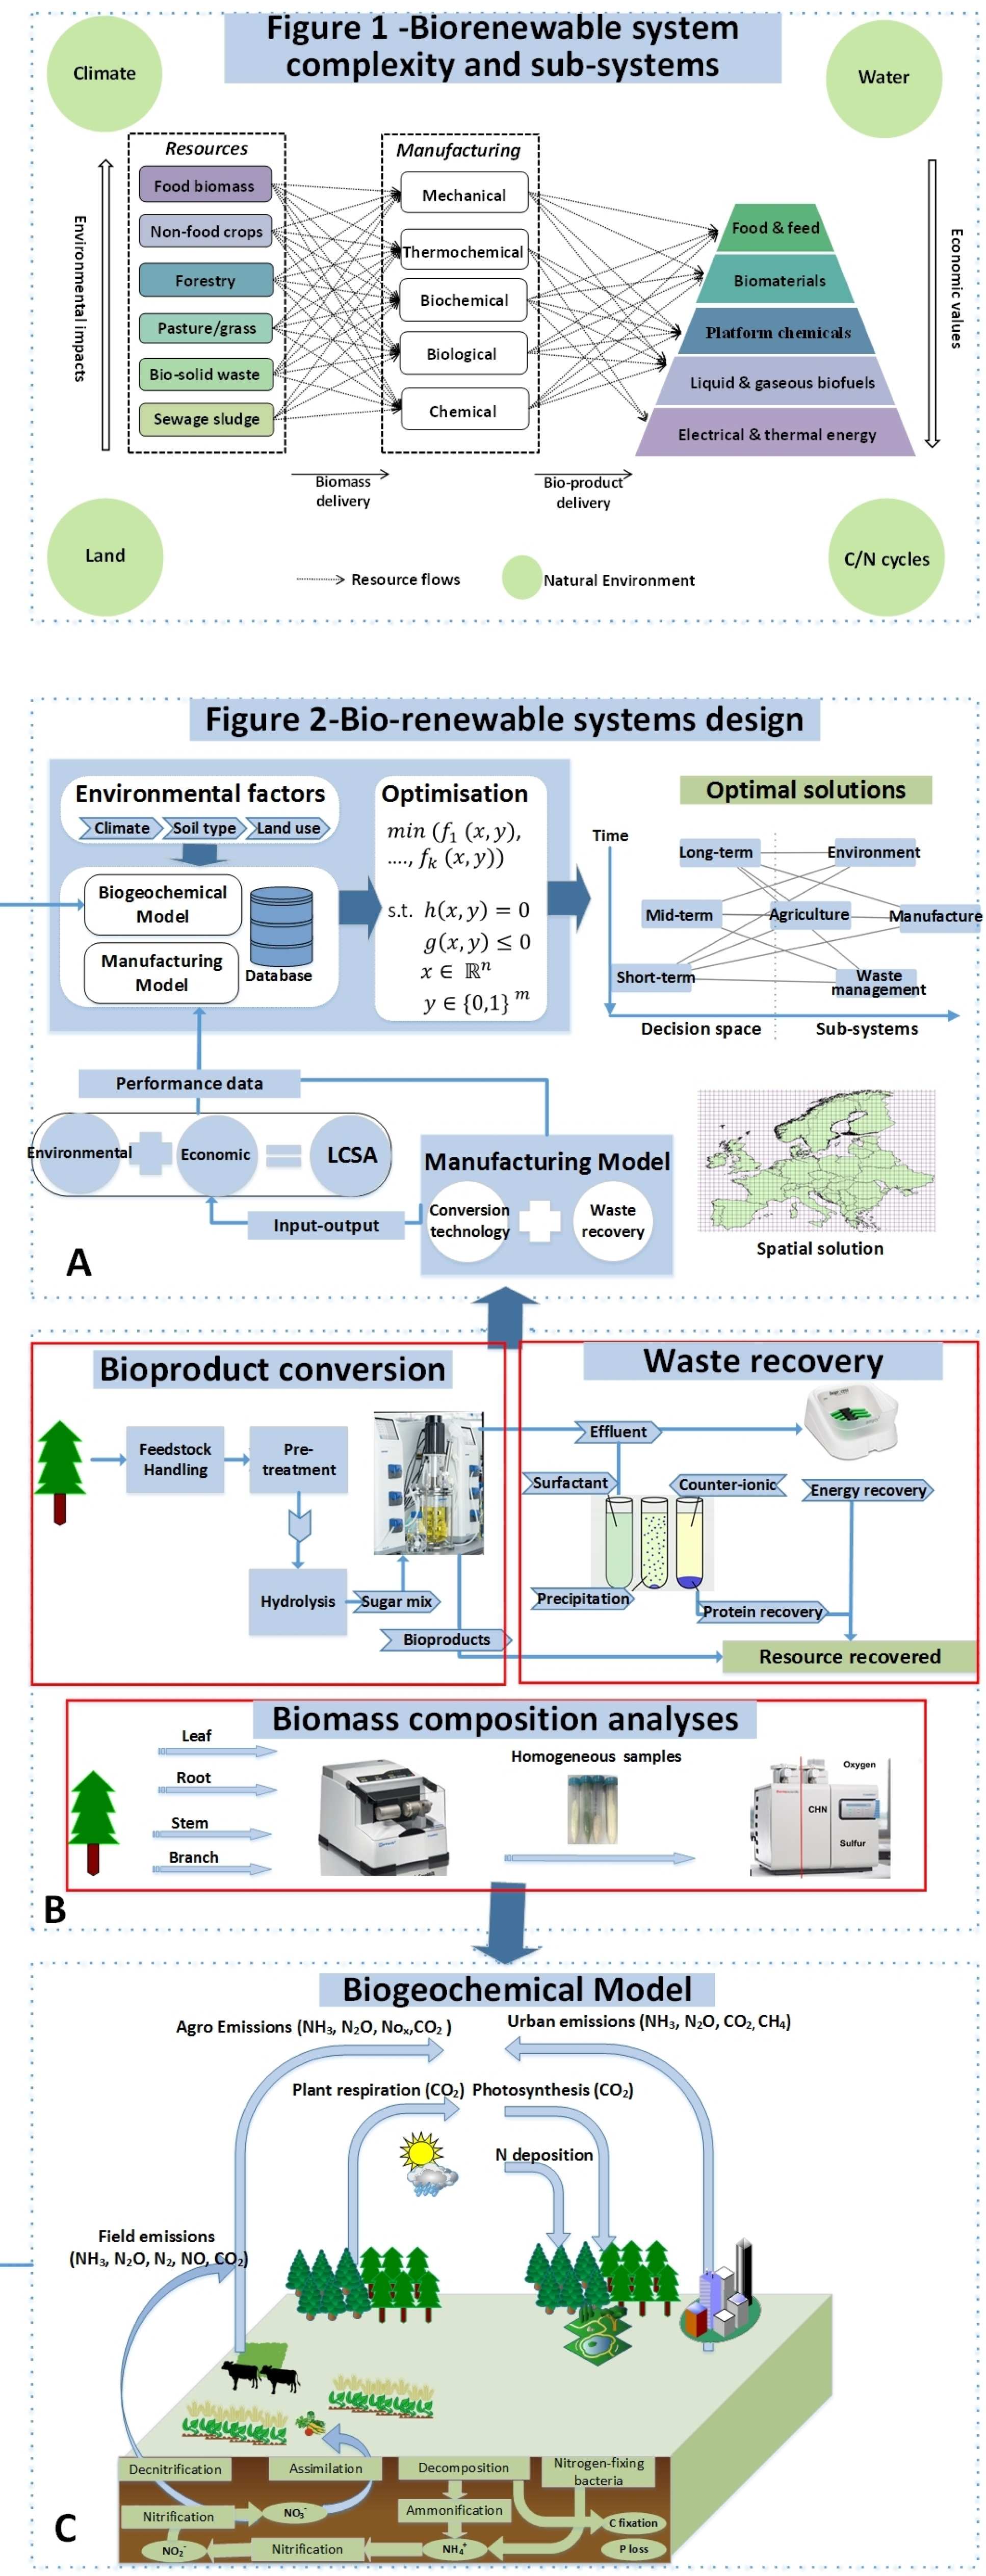 Figure 1 Biorenewable System complexity and sub-systems and Figure 2 Biorenewable Systems Design